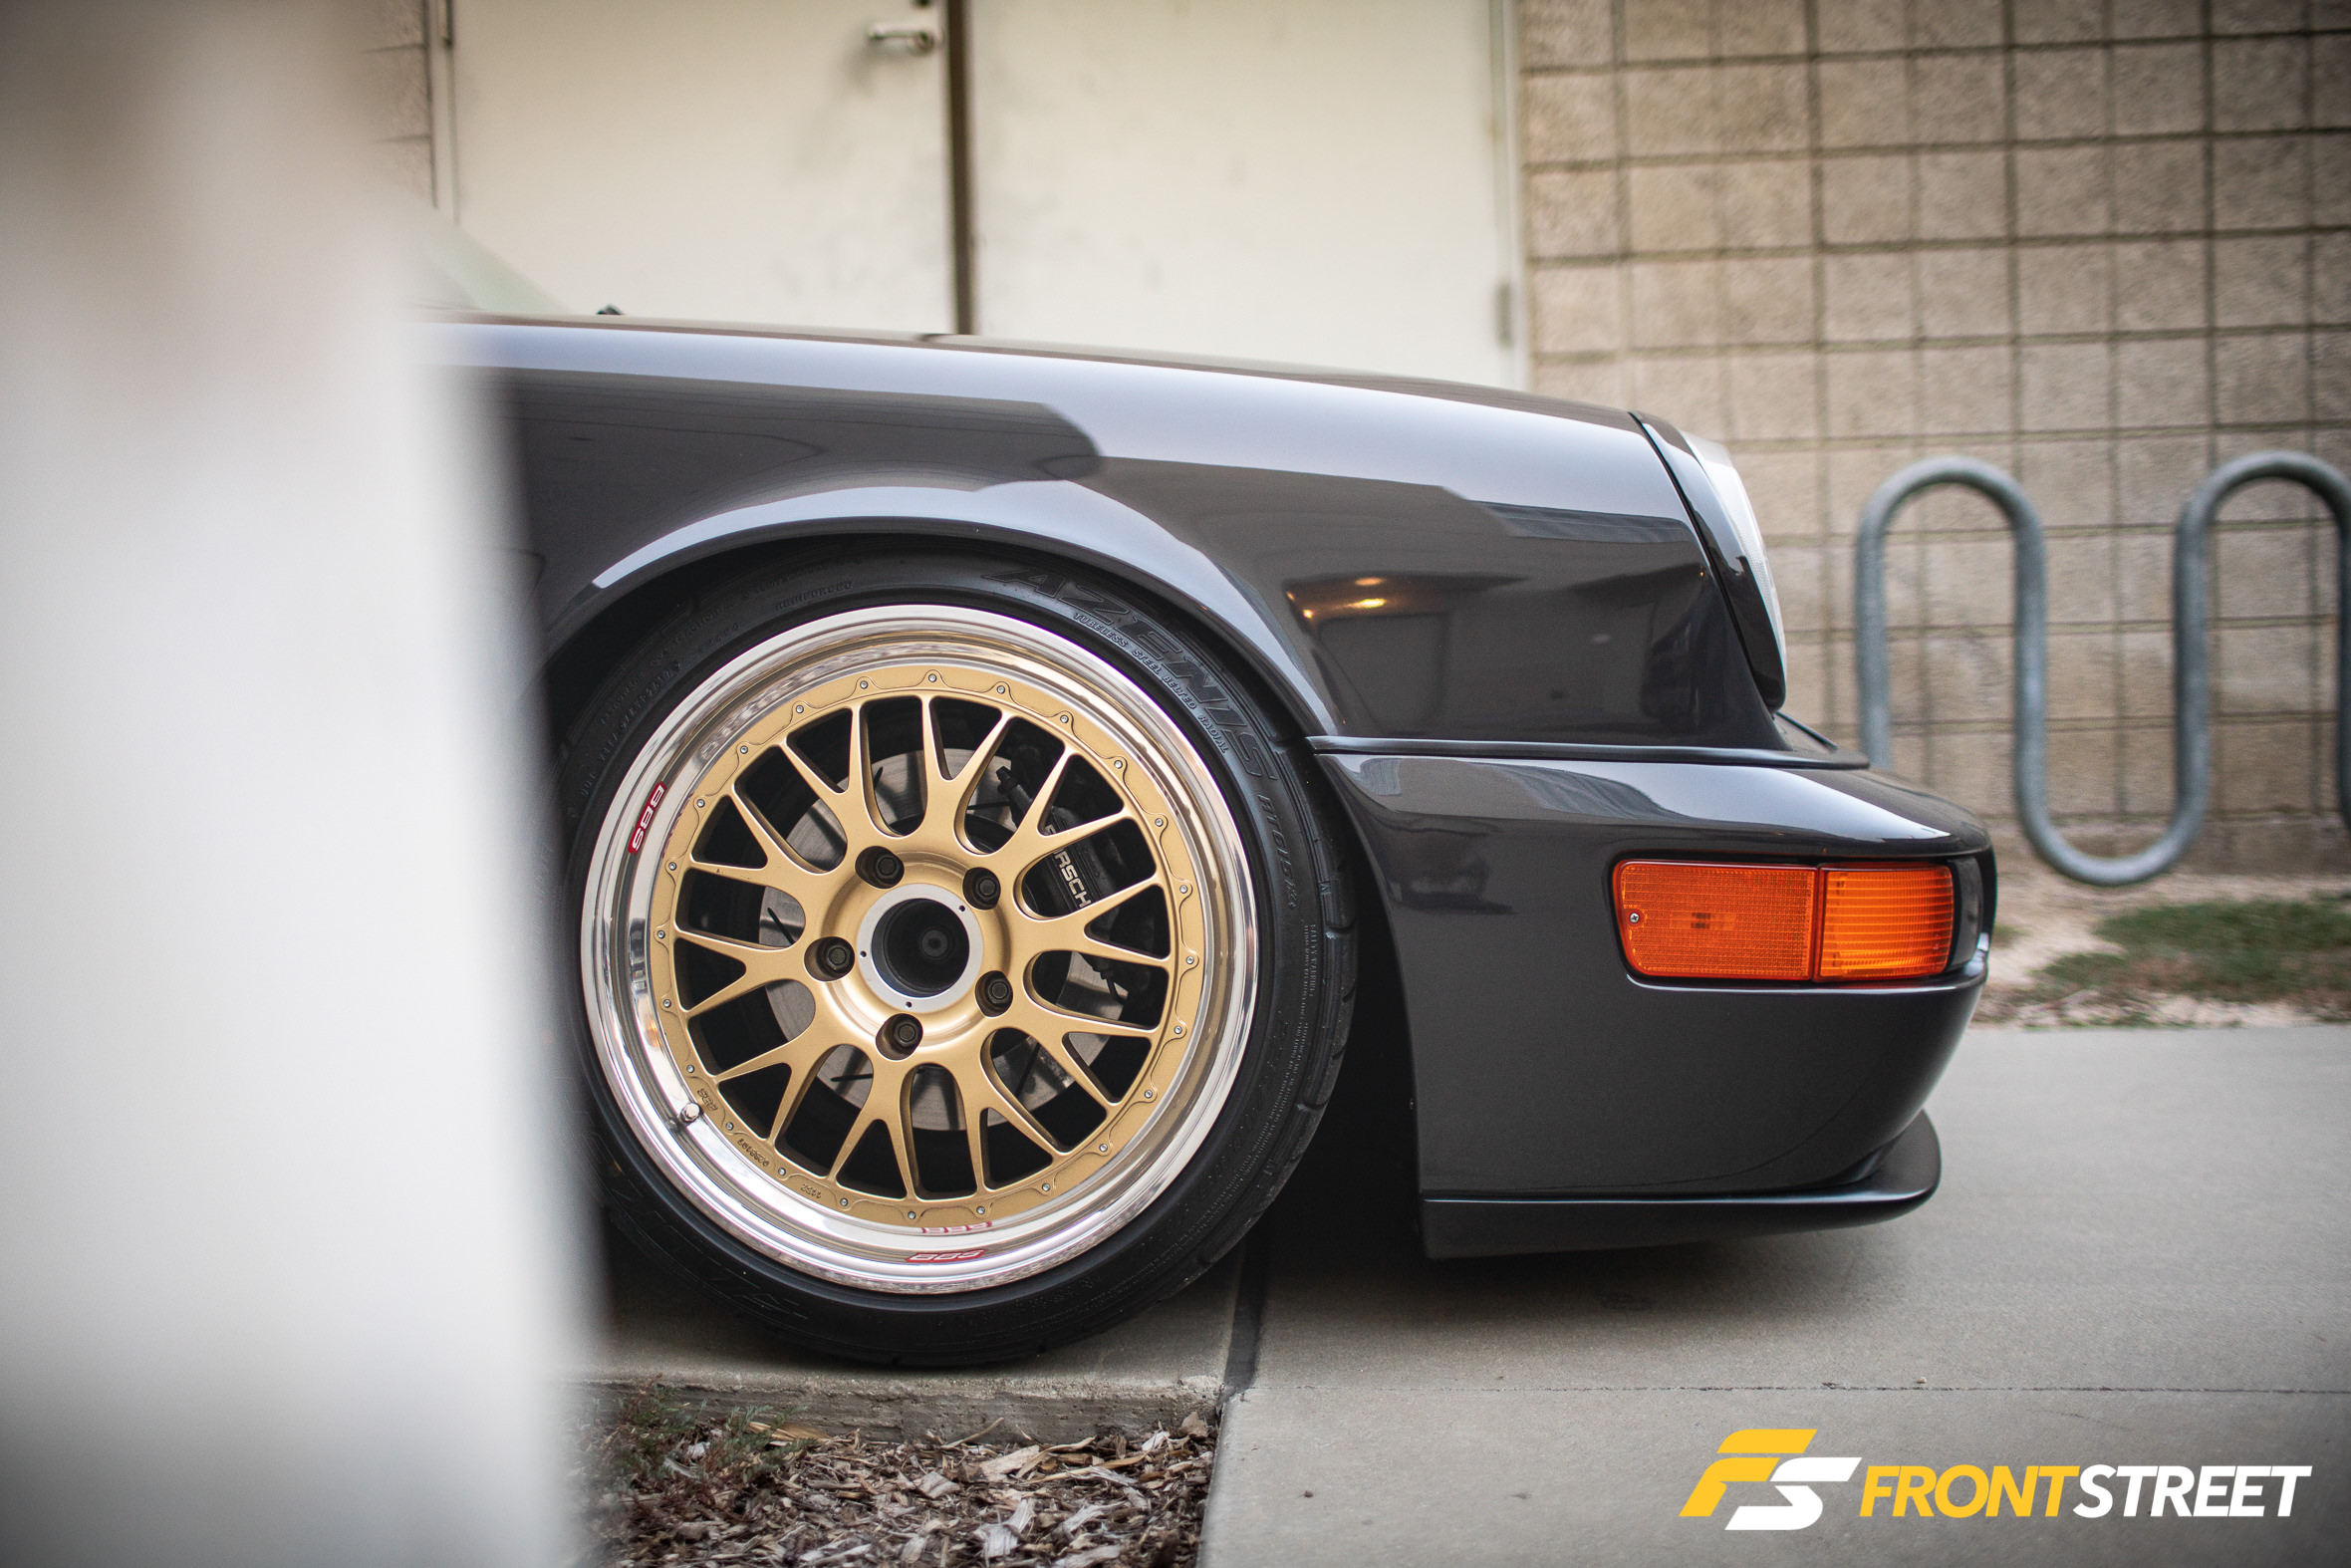 All Great Things Come To Those Who Wait: Jared Aguila's 1989 Carrera 4